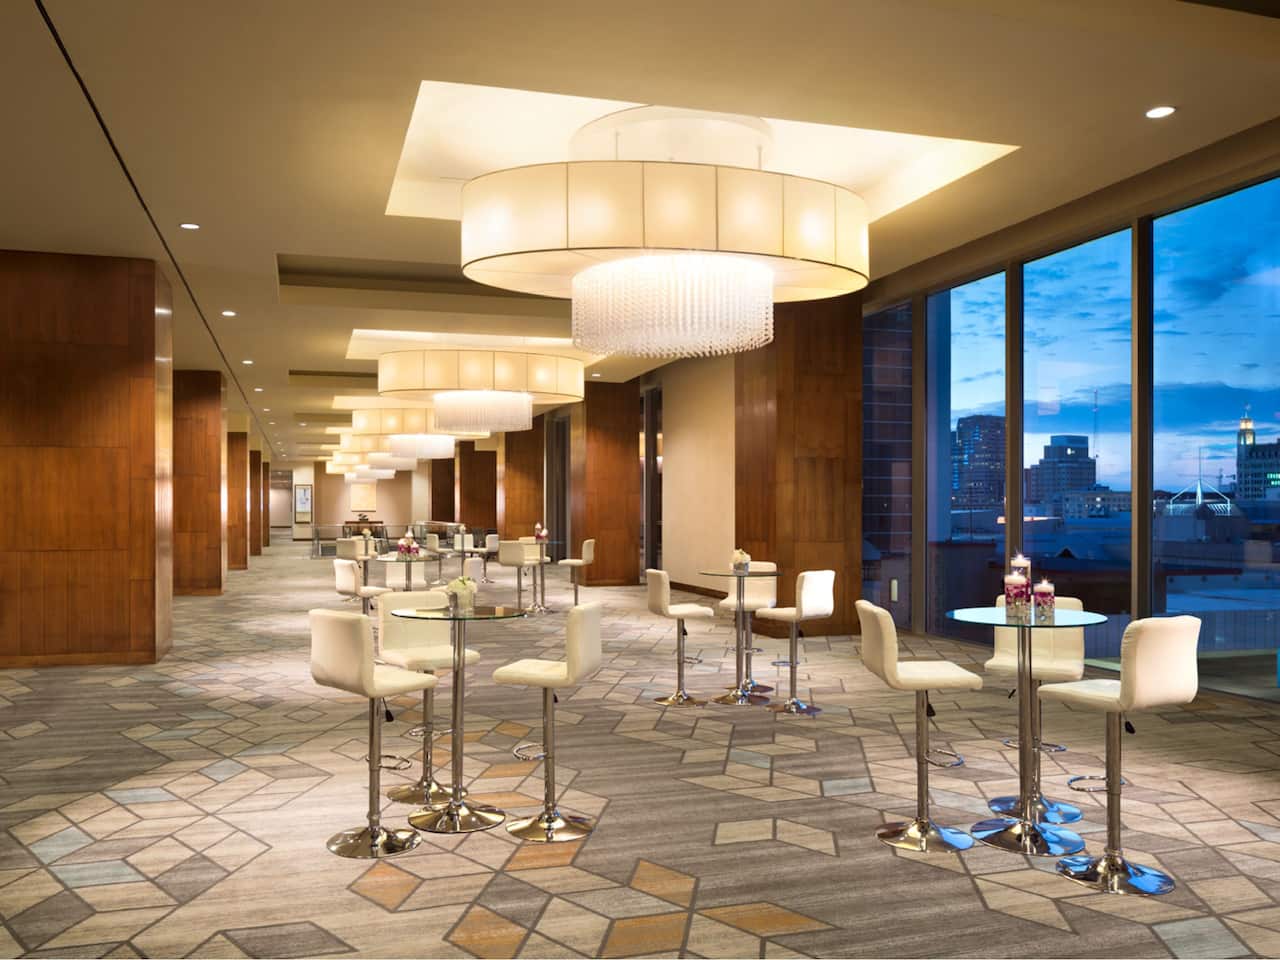 Ballroom Foyer event space with city views at dusk